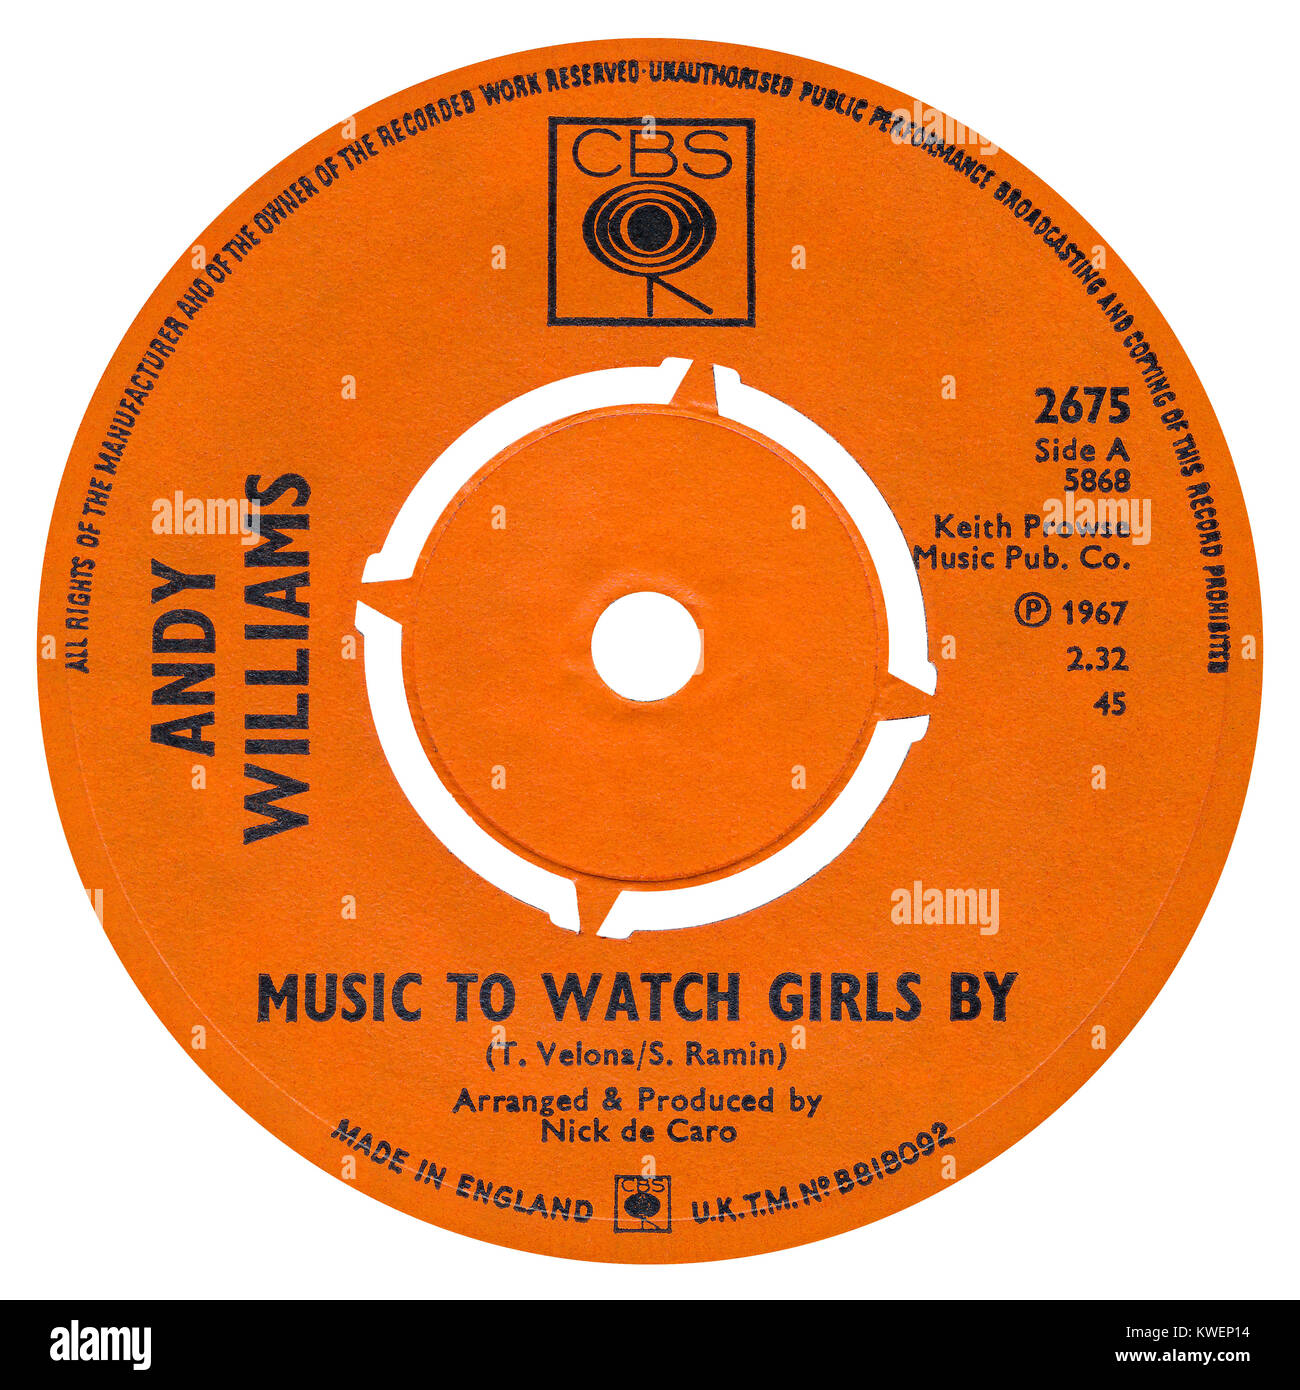 45 RPM 7' UK record label of Music To Watch Girls By by Andy Williams. Released in April 1967 on the CBS label. Stock Photo